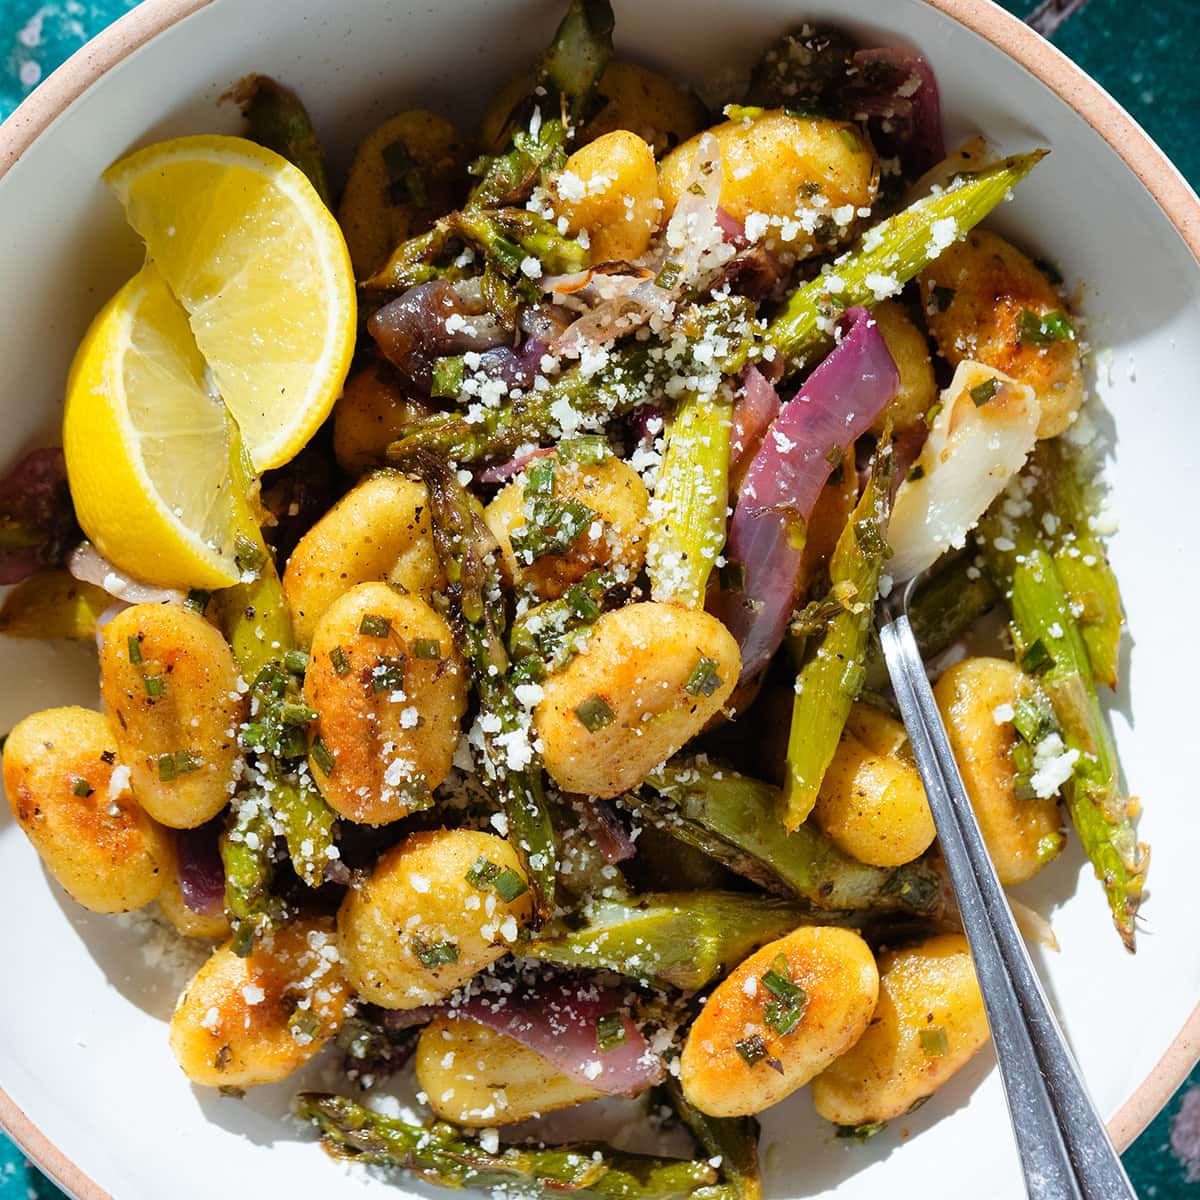 Crispy golden gnocchi with roasted asparagus, red onion, and pecorino in a white bowl with lemon wedges on the side.